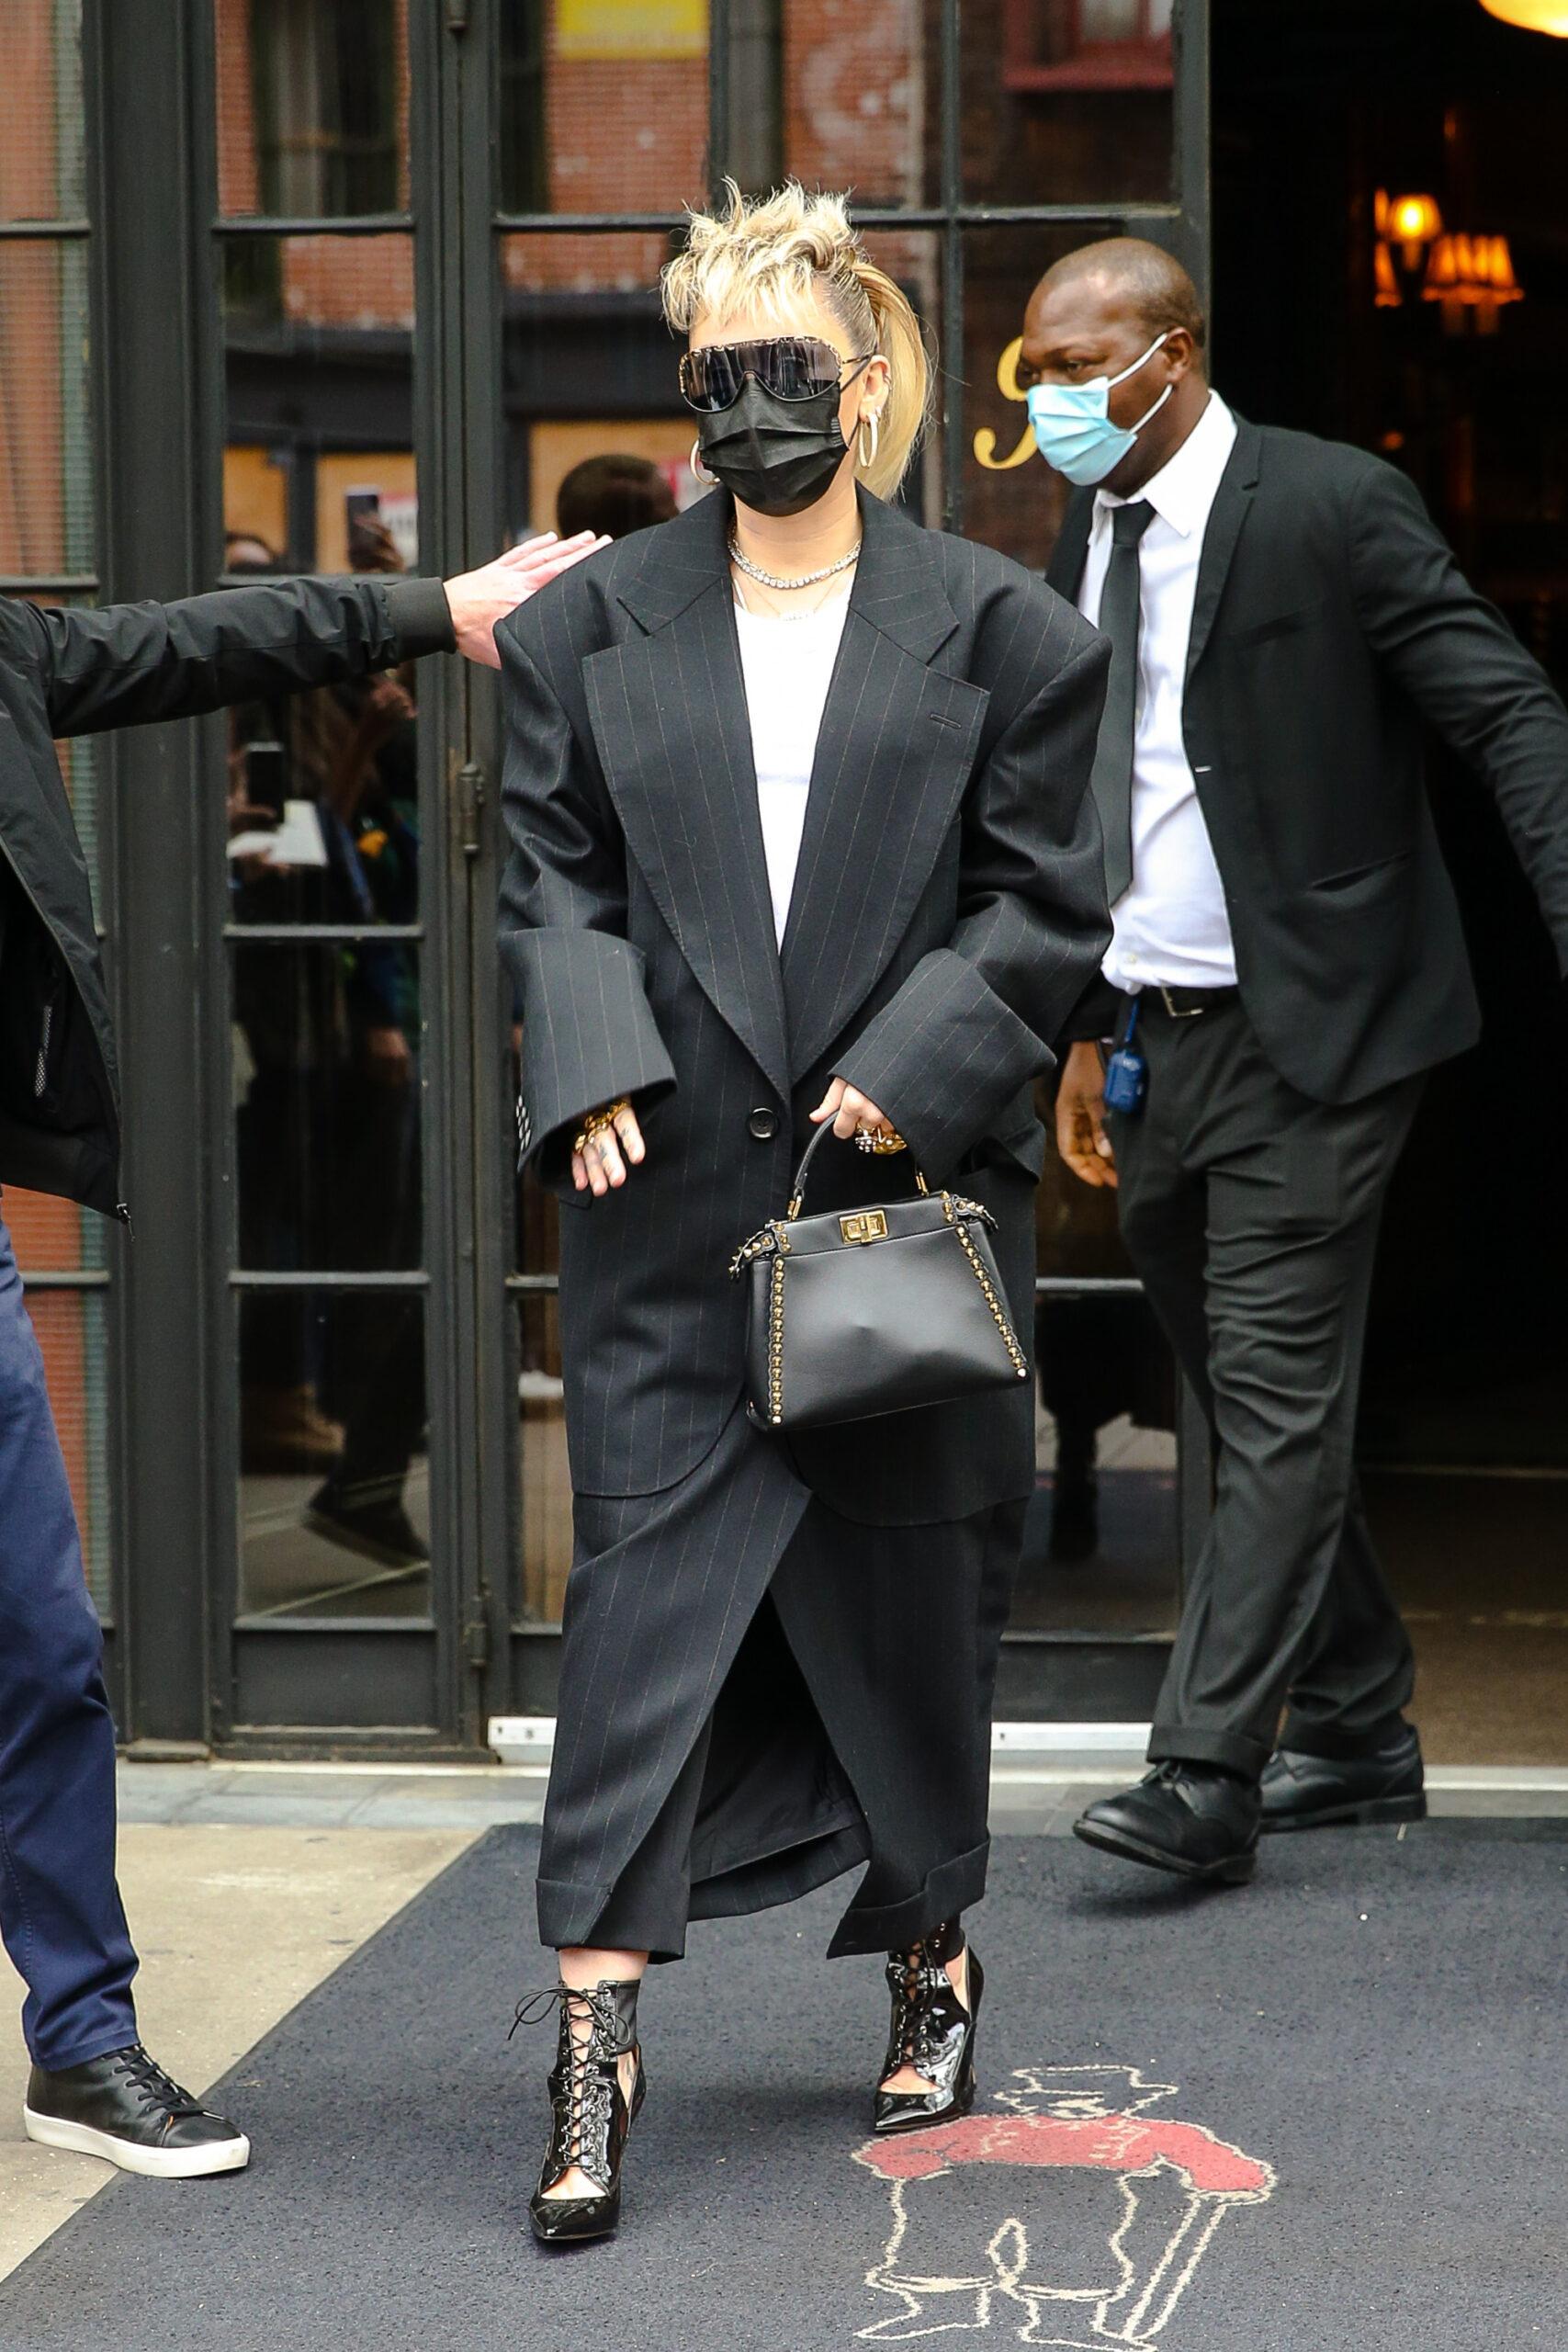 Miley Cyrus seen wearing a long black coat as leaving her hotel in NYC